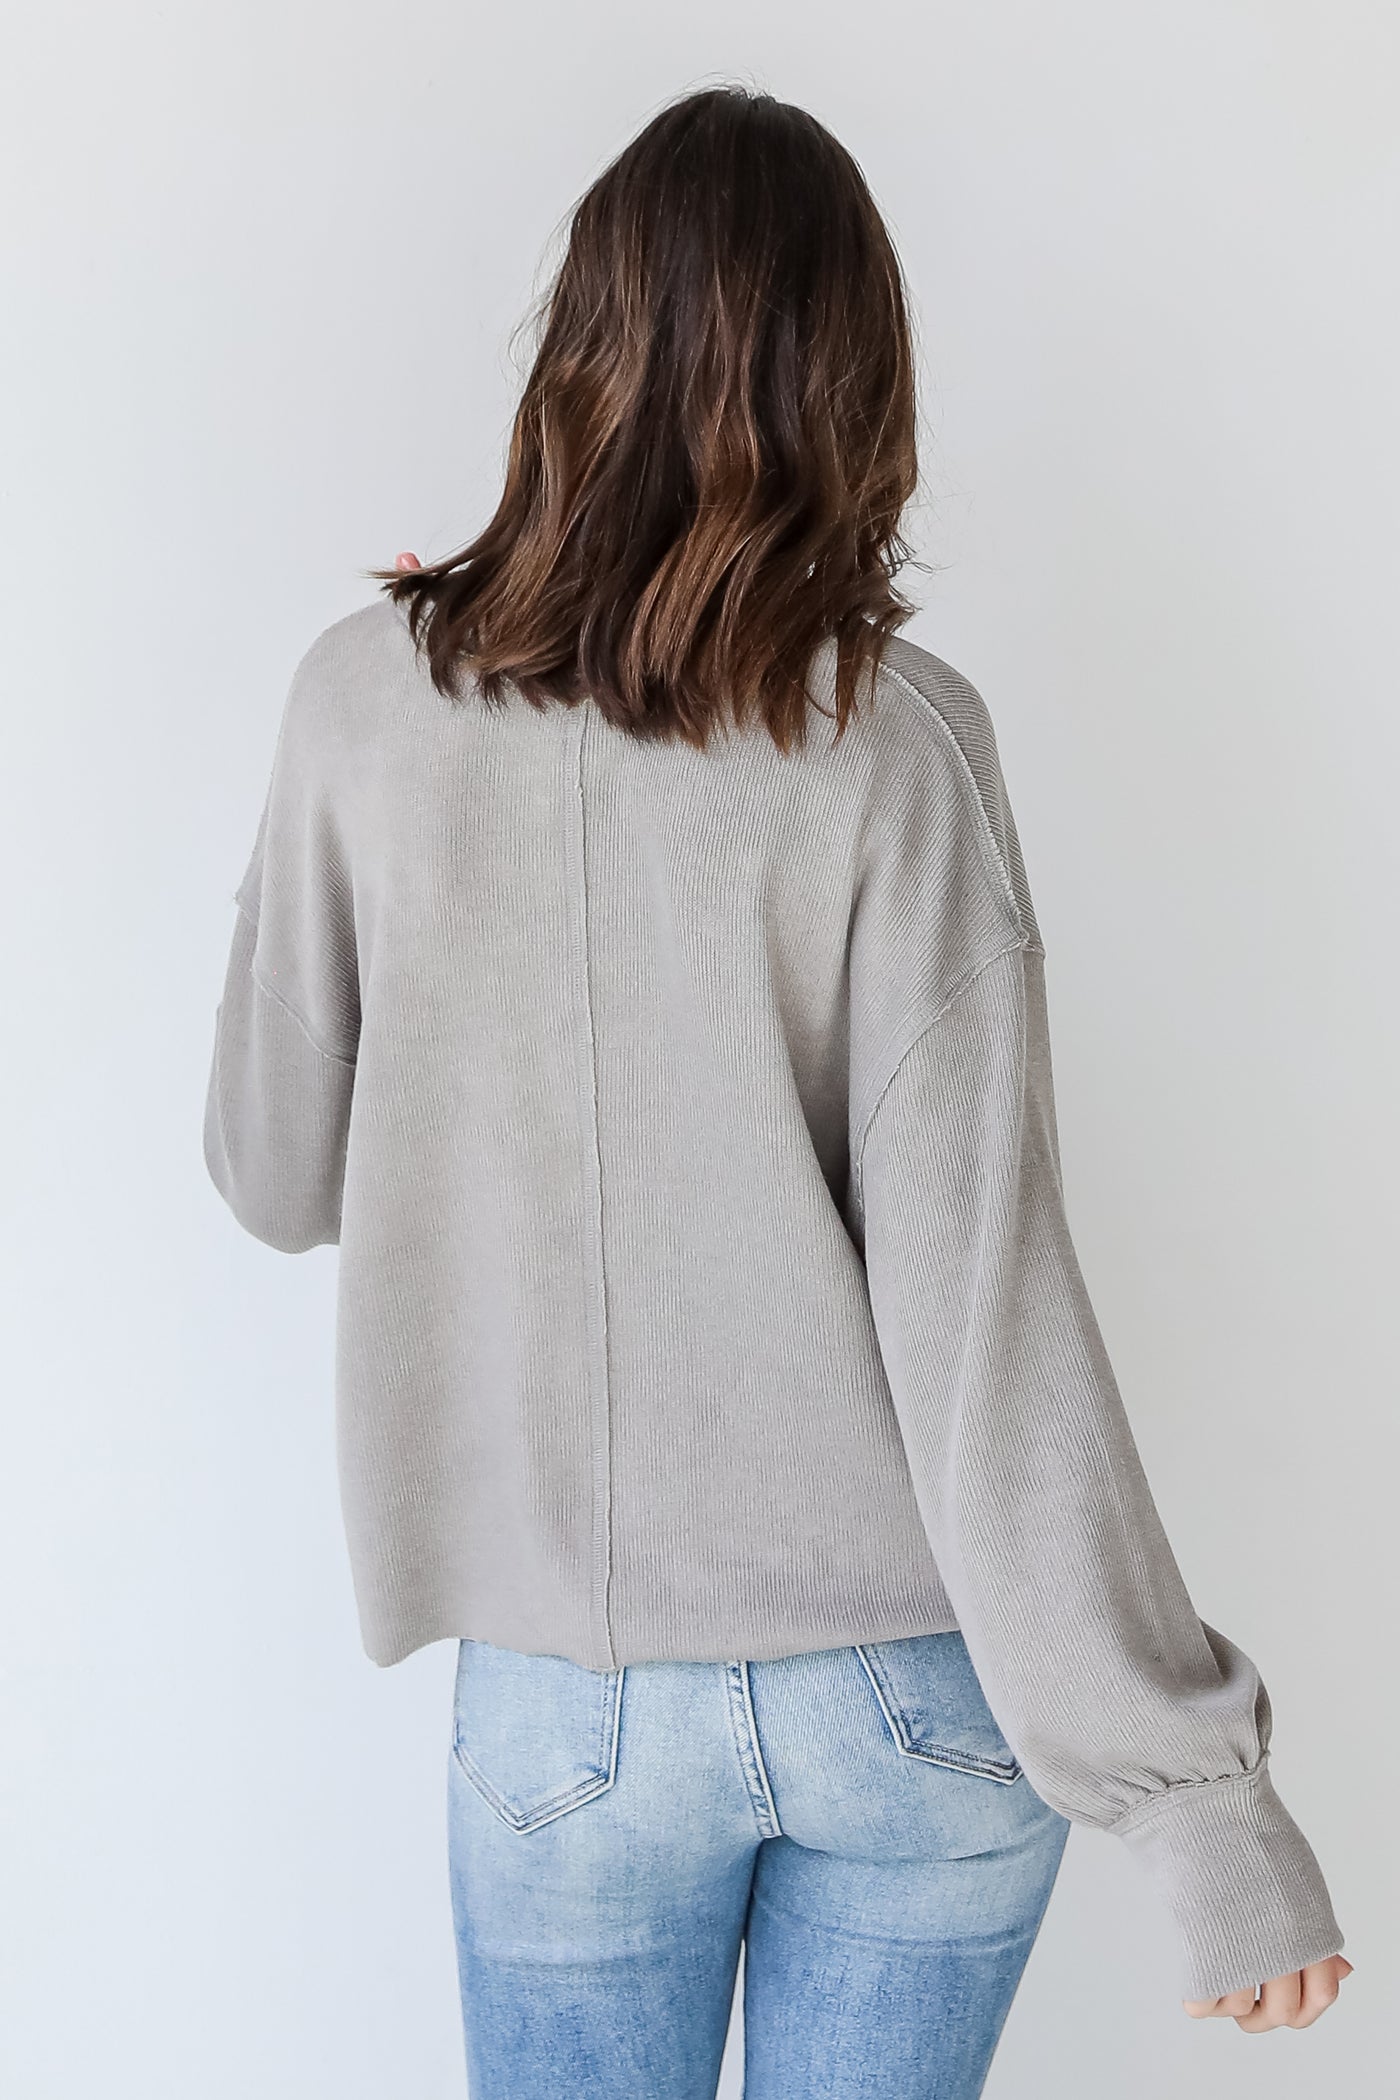 Knit Top in charcoal back view